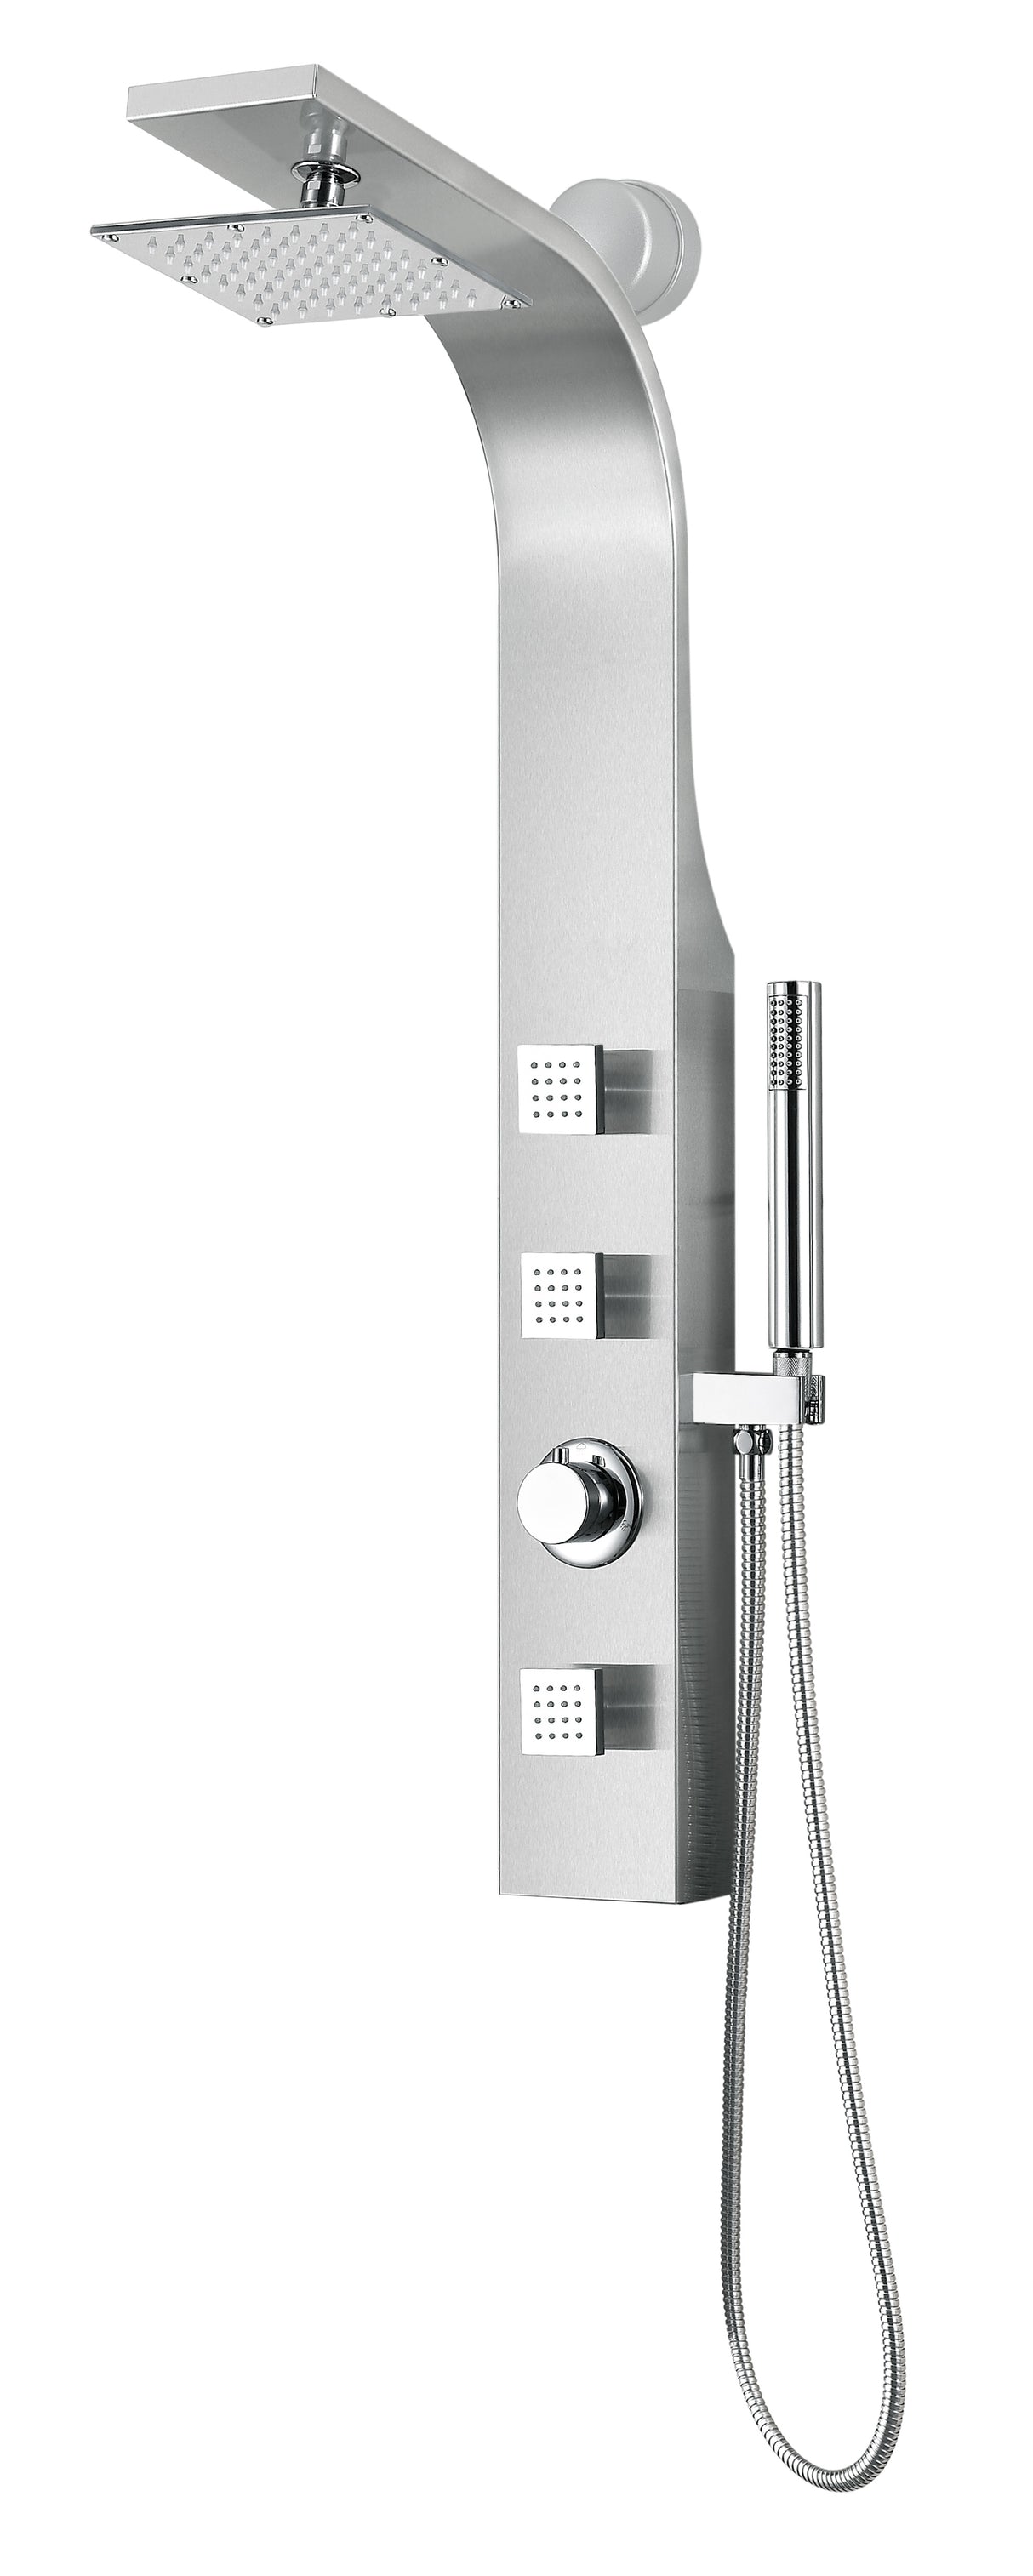 ANZZI SP-AZ8106 Silent 40 in. Full Body Shower Panel with Heavy Rain Shower and Spray Wand in Brushed Steel